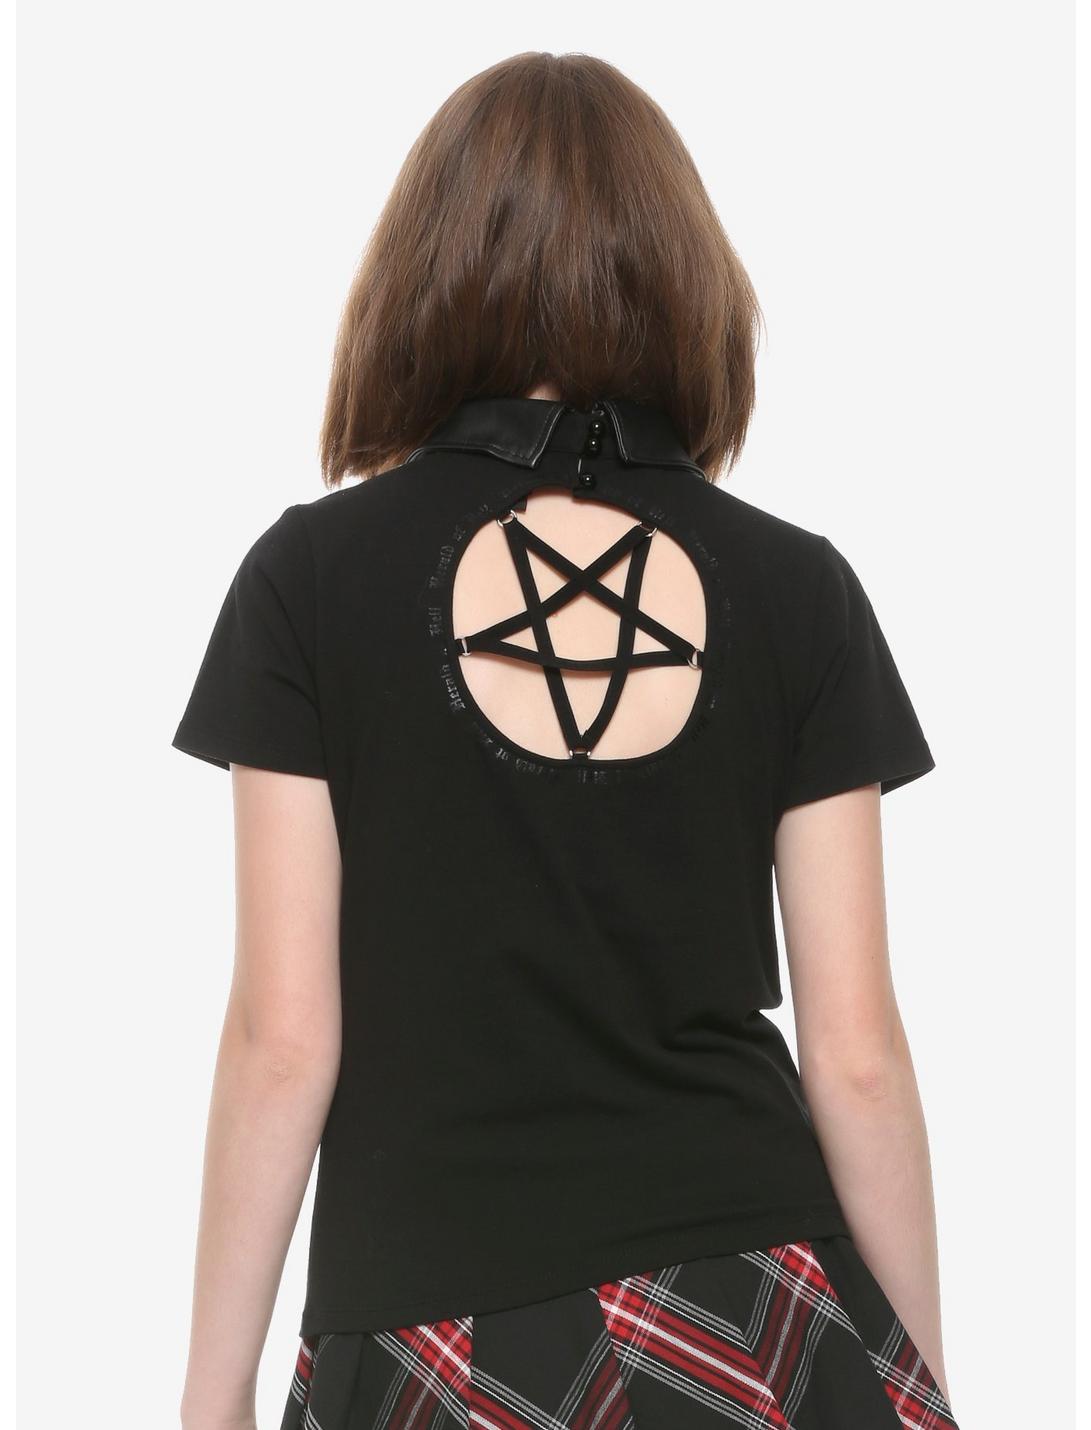 Chilling Adventures Of Sabrina Herald Of Hell Girls Collared Top, BLACK, hi-res